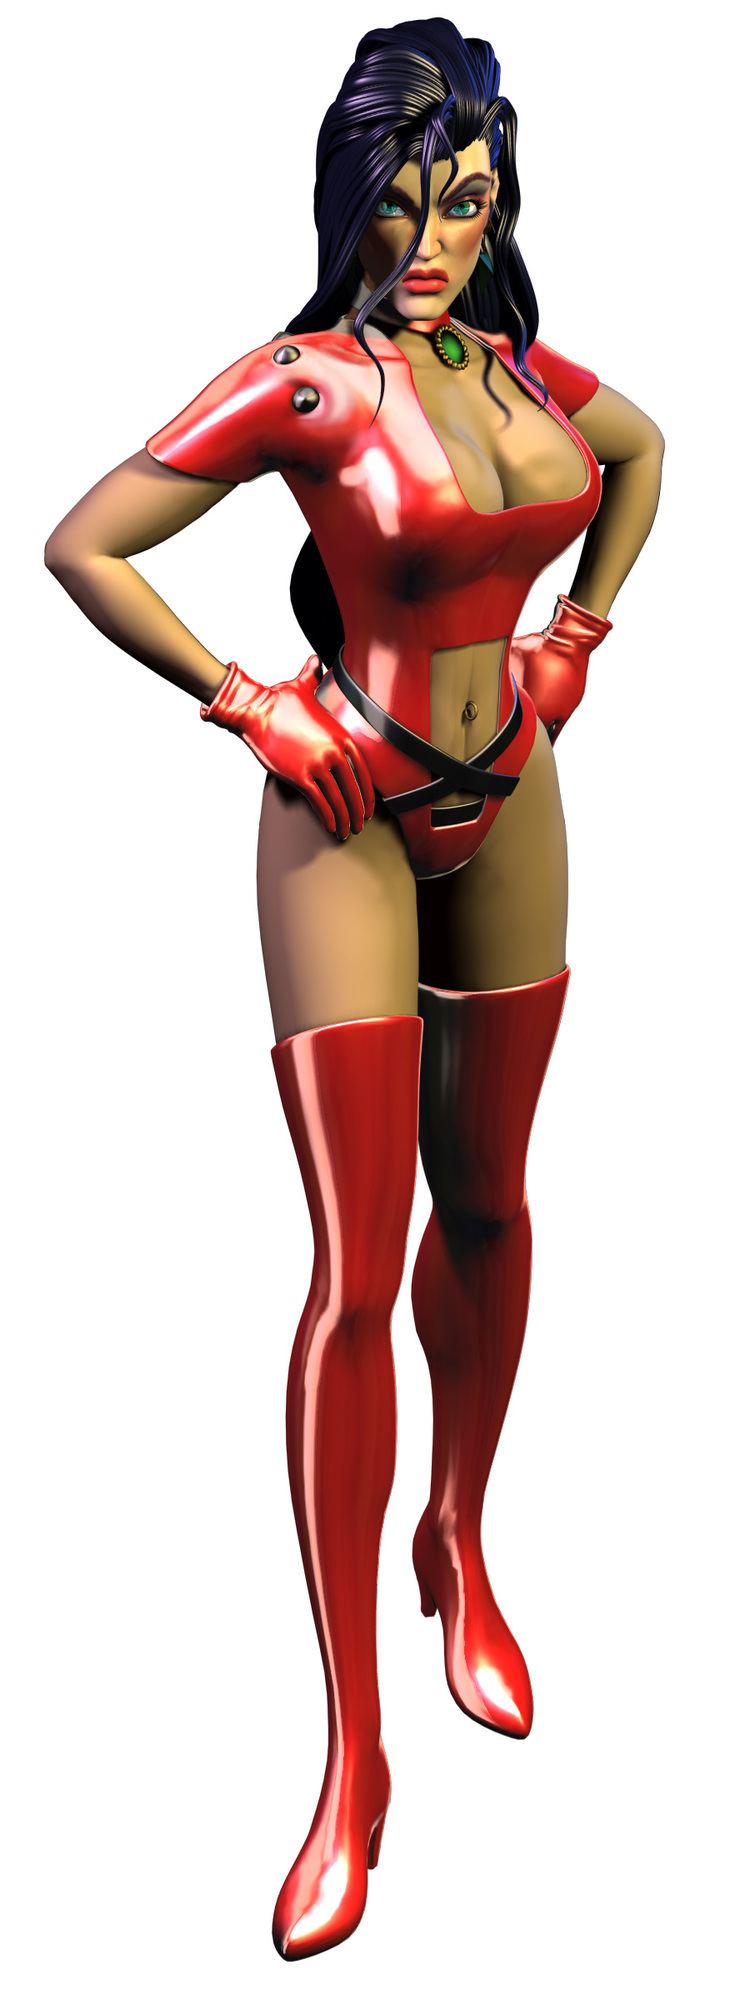 Elexis Sinclaire with an angry face while wearing a red bodysuit, red gloves, and red boots